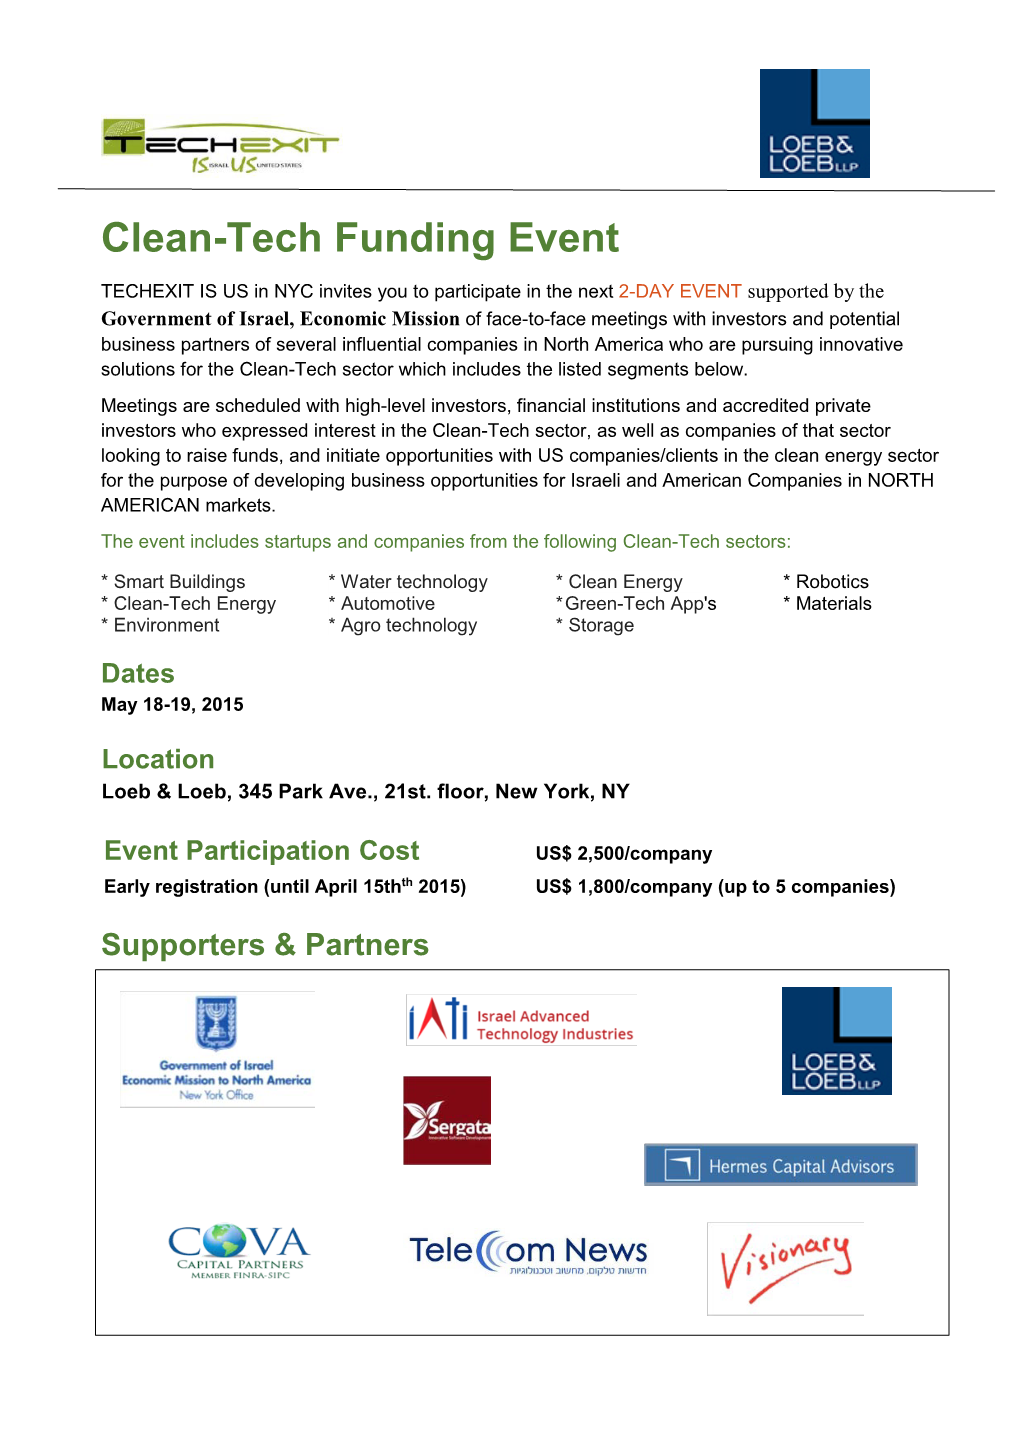 Clean-Tech Funding Event